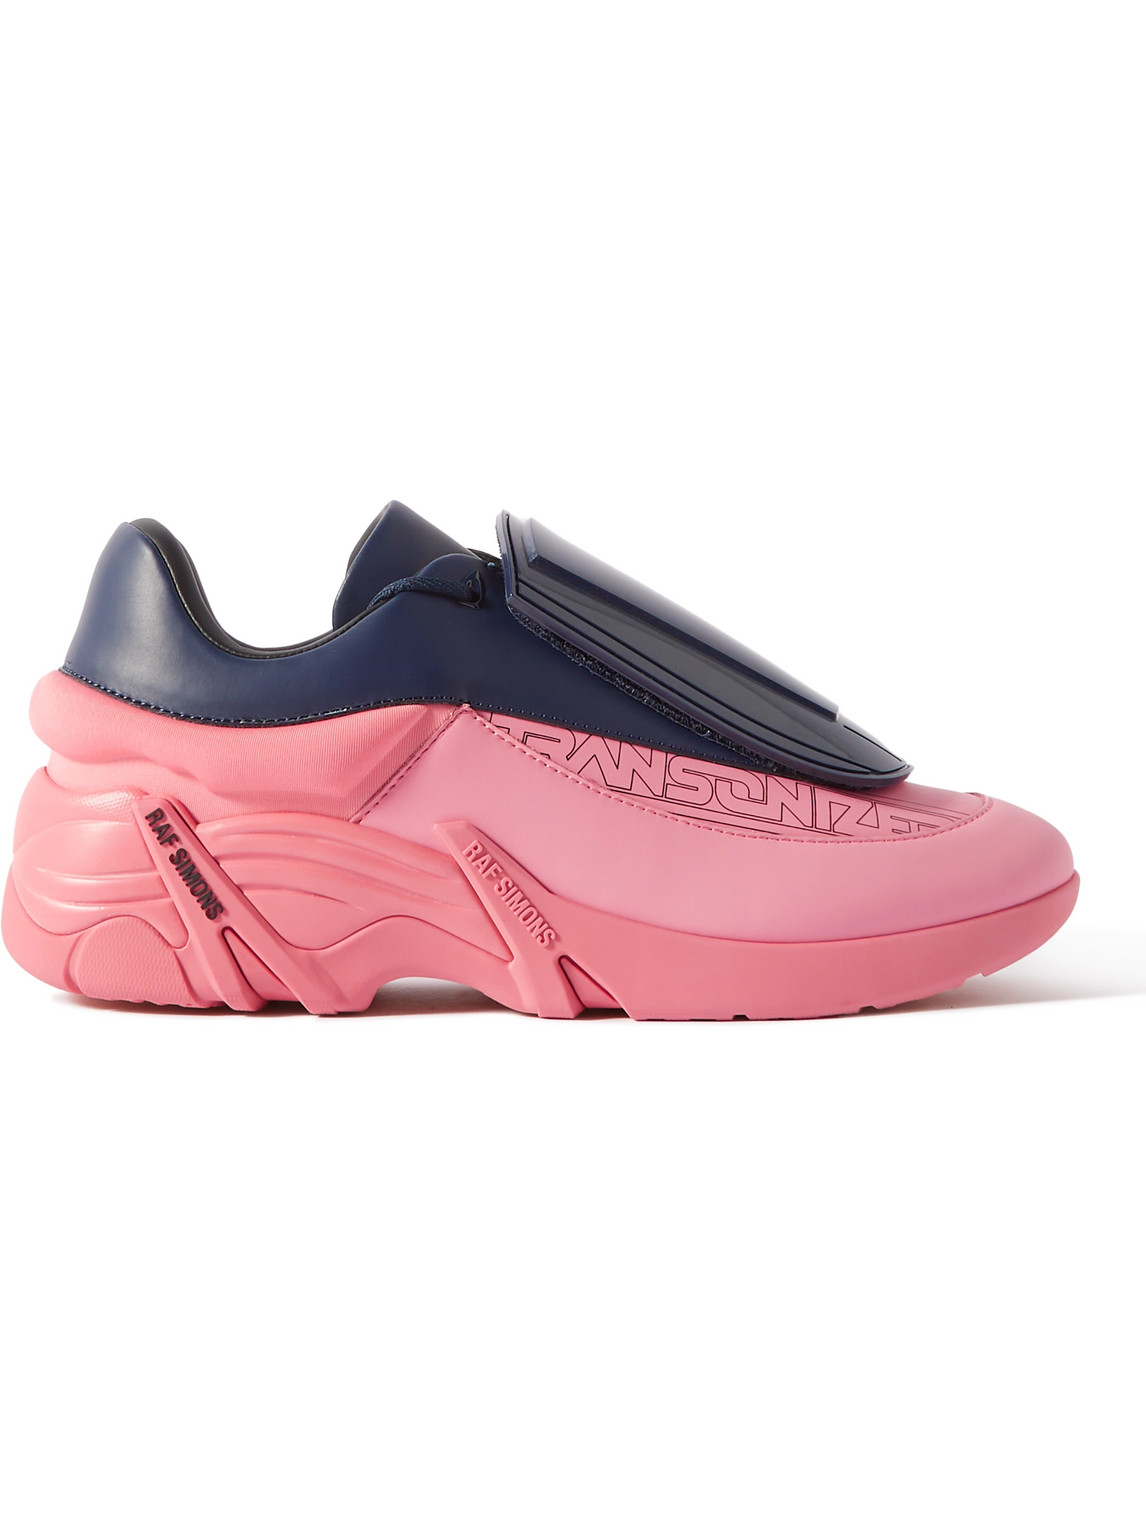 Raf Simons - Antei Shell and PVC-Trimmed Leather Sneakers - Men - Pink - EU 41